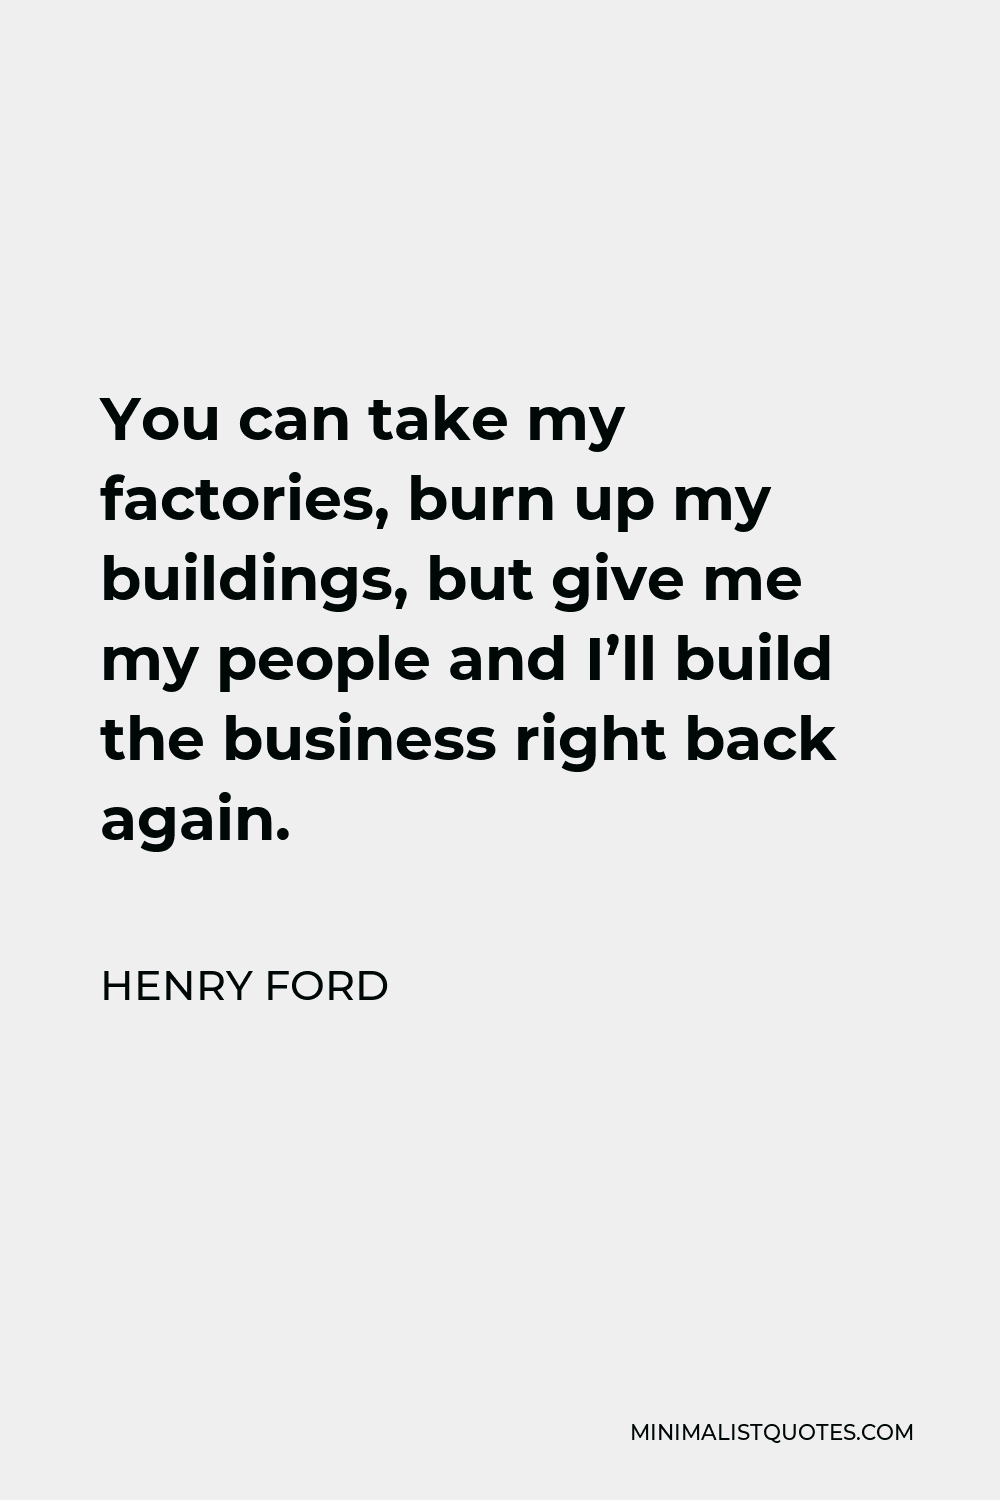 Henry Ford Quote - You can take my factories, burn up my buildings, but give me my people and I’ll build the business right back again.